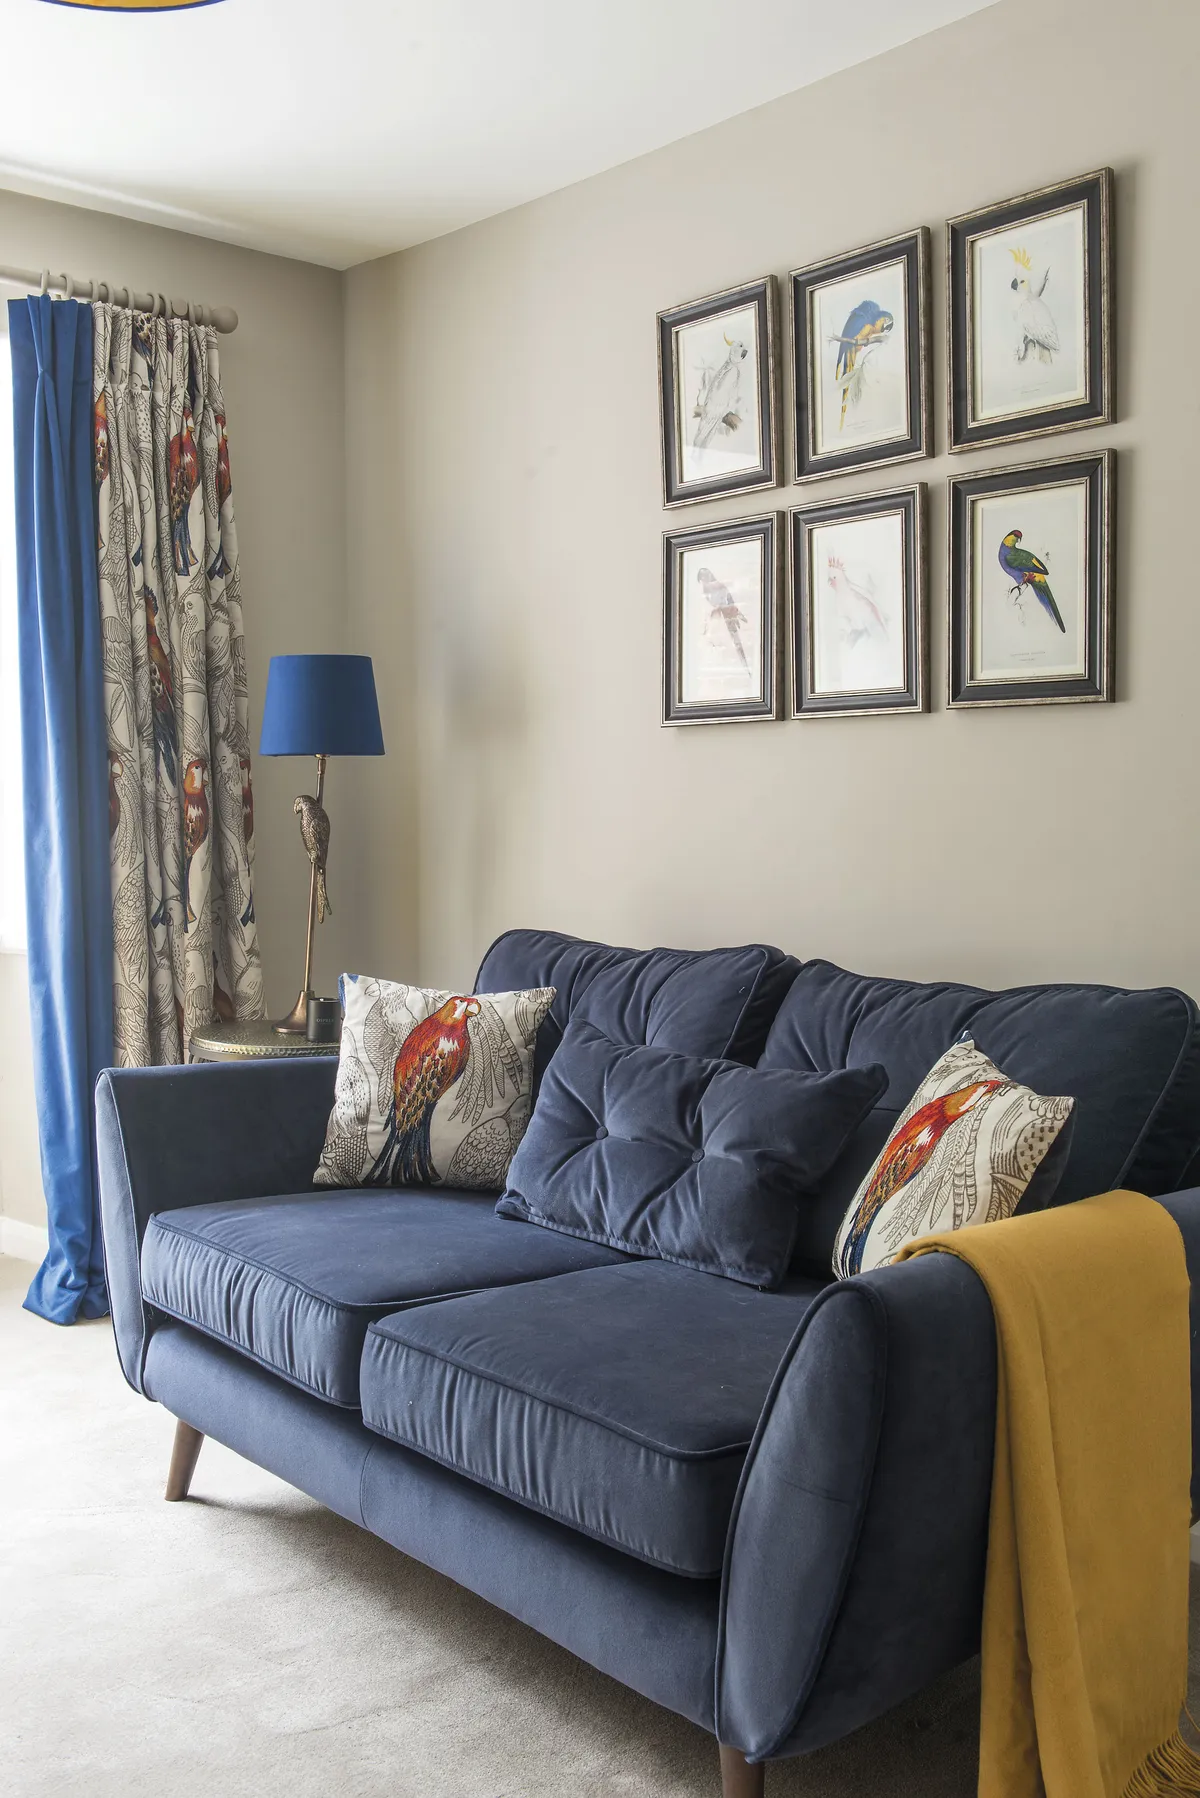 The couple decided on a Zinc blue velvet sofa from DFS for the snug and arranged their parrot prints above it. The wall is painted in Elephant’s Breath by Farrow & Ball